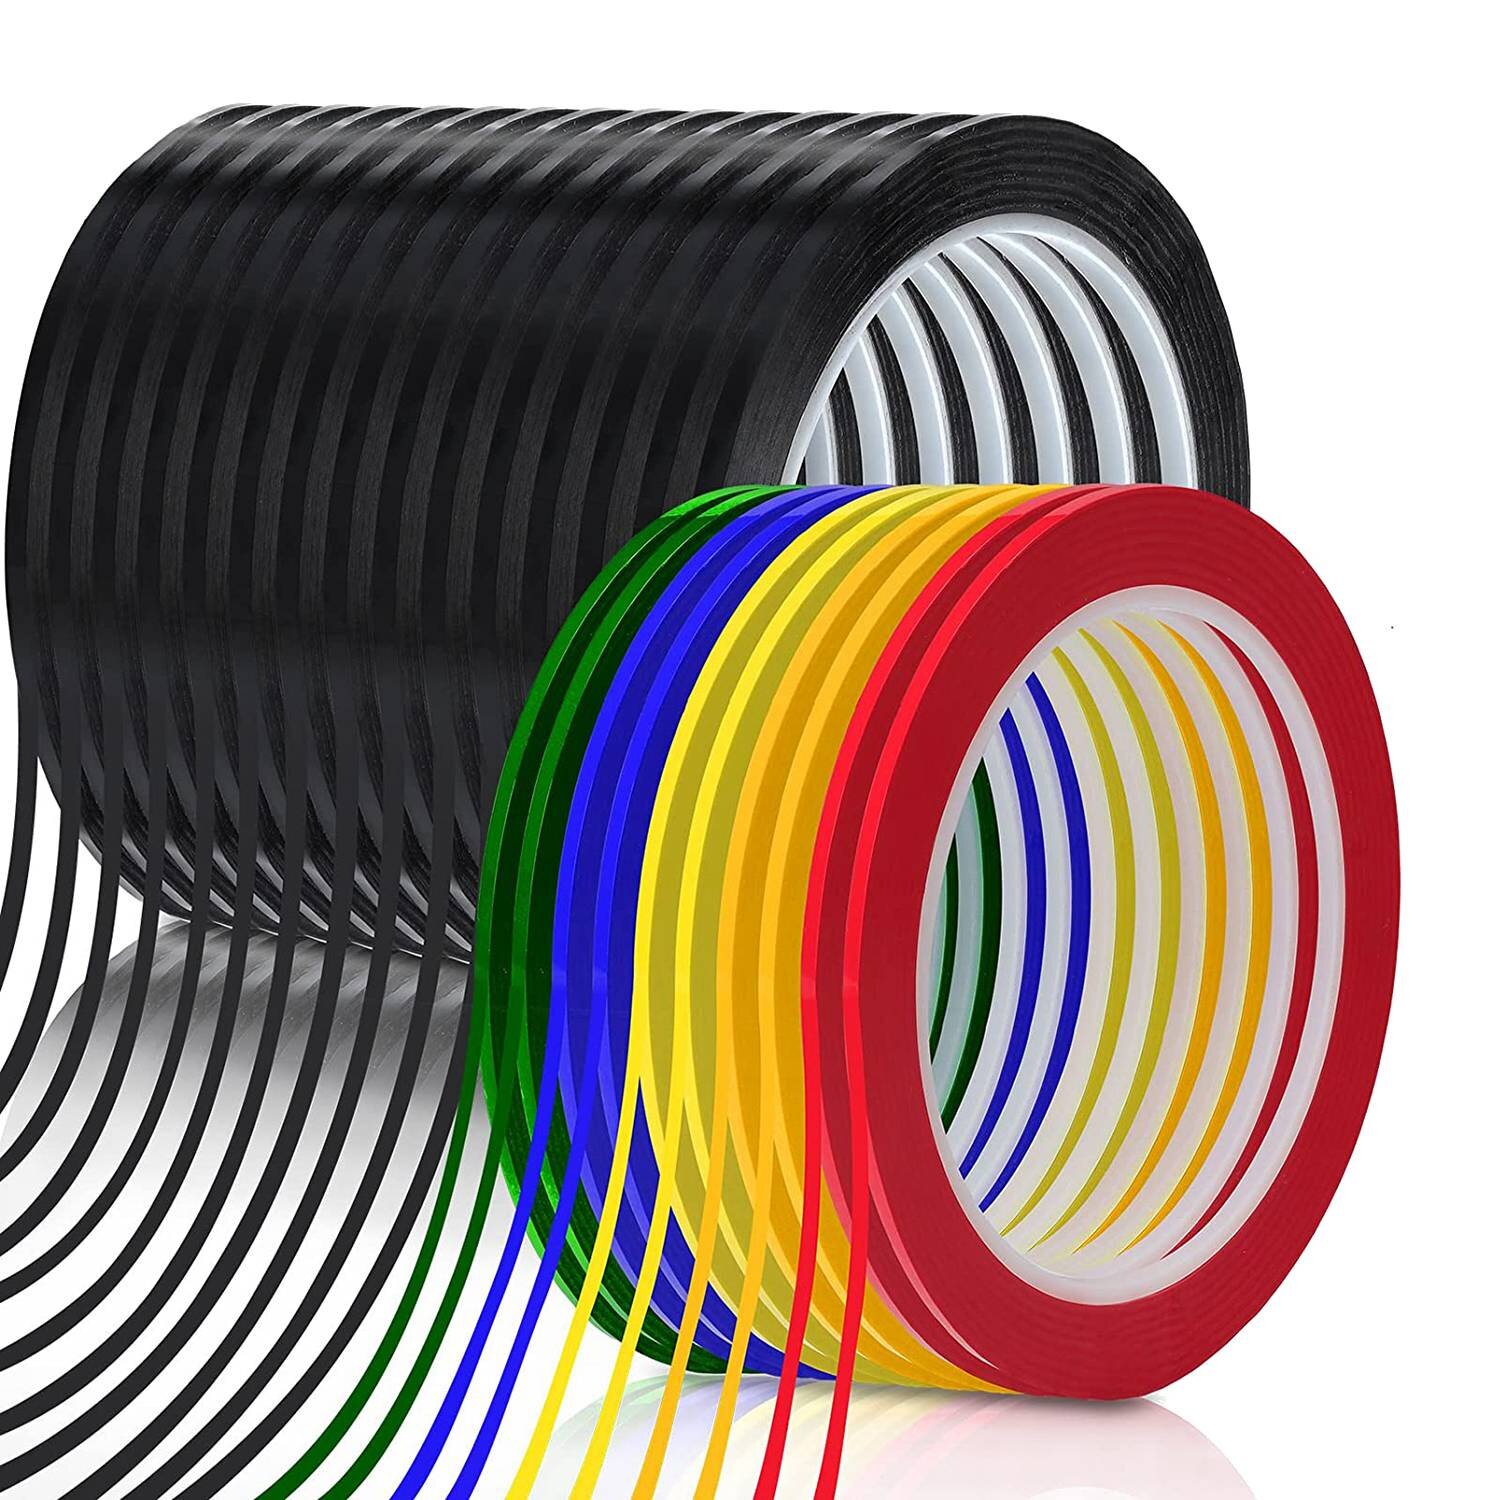 24 Rolls Whiteboard Thin Tape 216 Feet Per Roll 1/8 Inch Art Graphic Chart Grid Electrical Tape Dry Erase Tape, 6 Colors